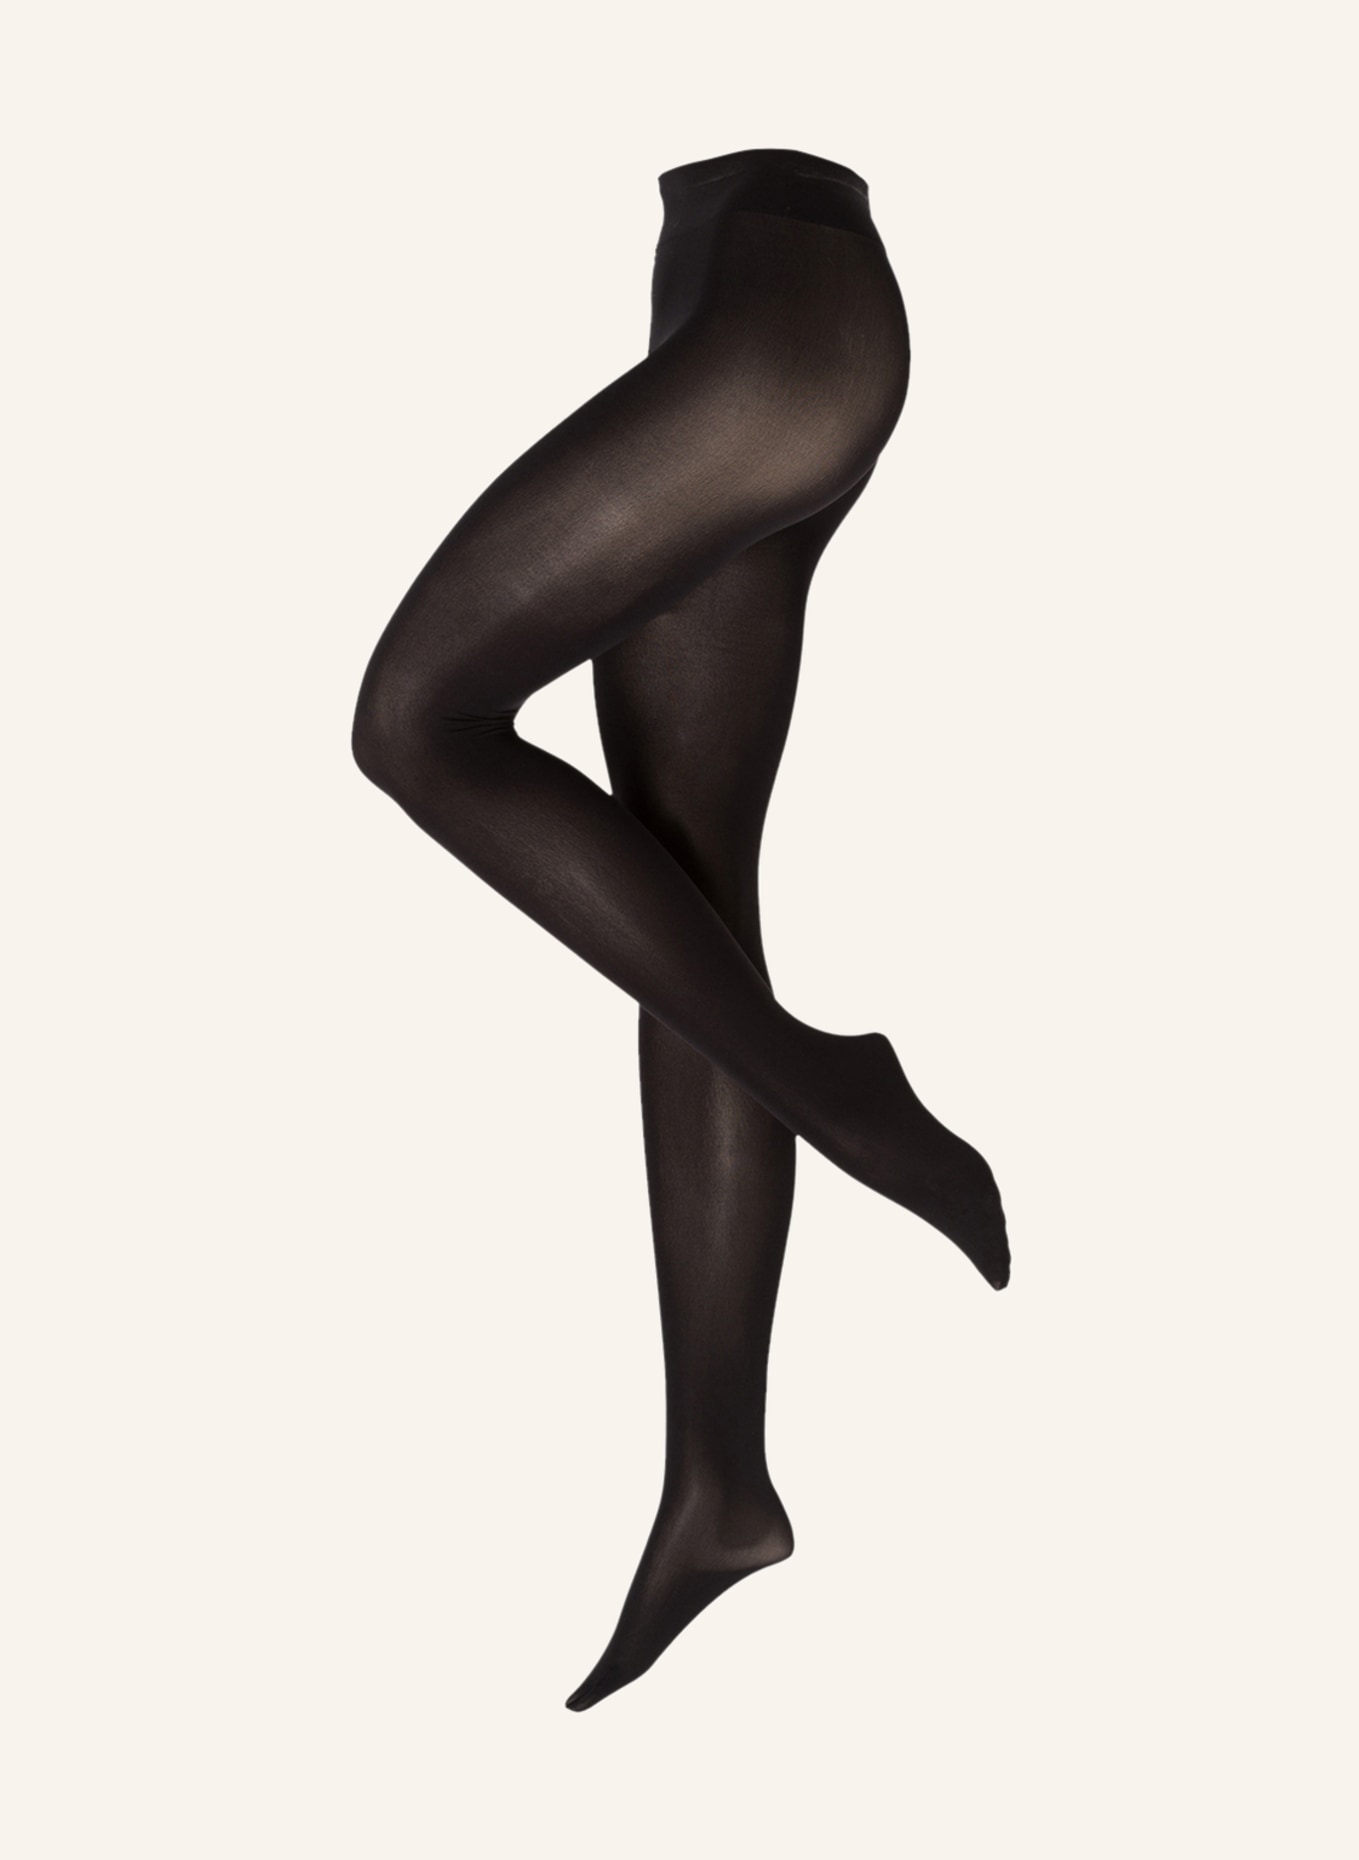  Wolford 80 Tights Leggings black For Women : Clothing